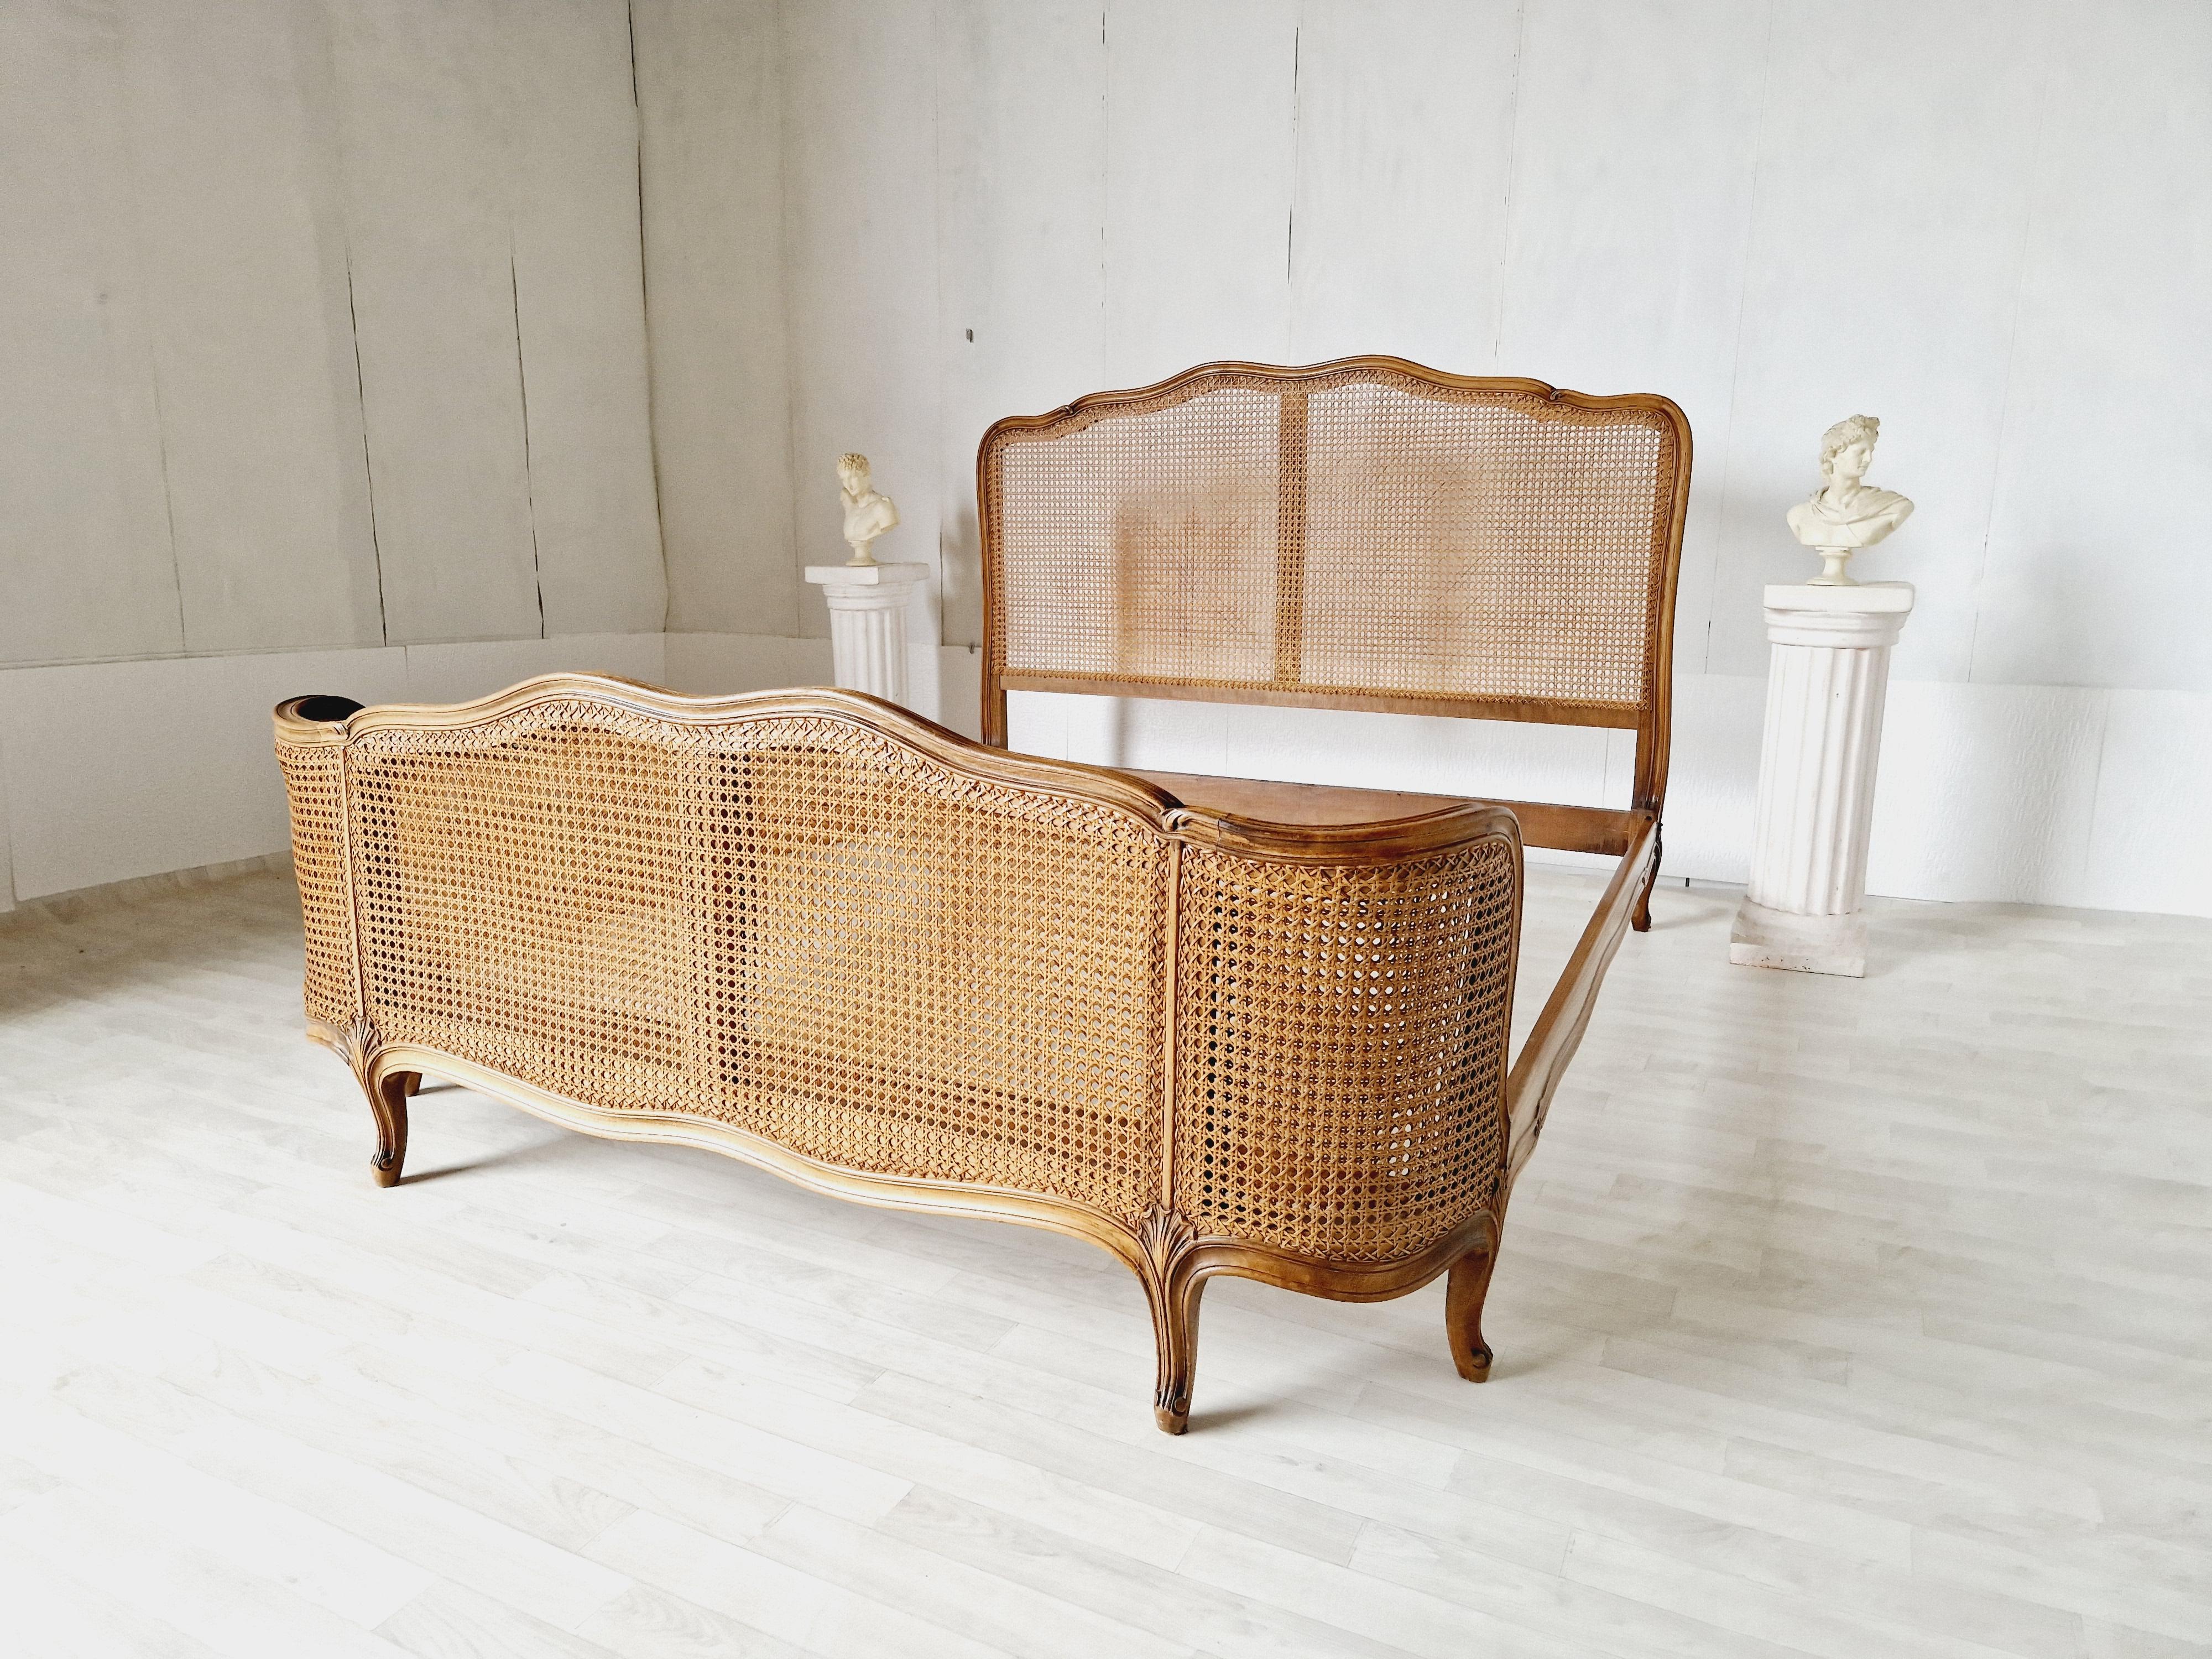 
We are delighted to offer for sale this Cane Corbeille Bed.

This exquisite antique bed will transport you back in time to the elegance of 1920s France. Crafted in the Louis XV style, this Rocaille bed features delicate carvings and a fabulous wood